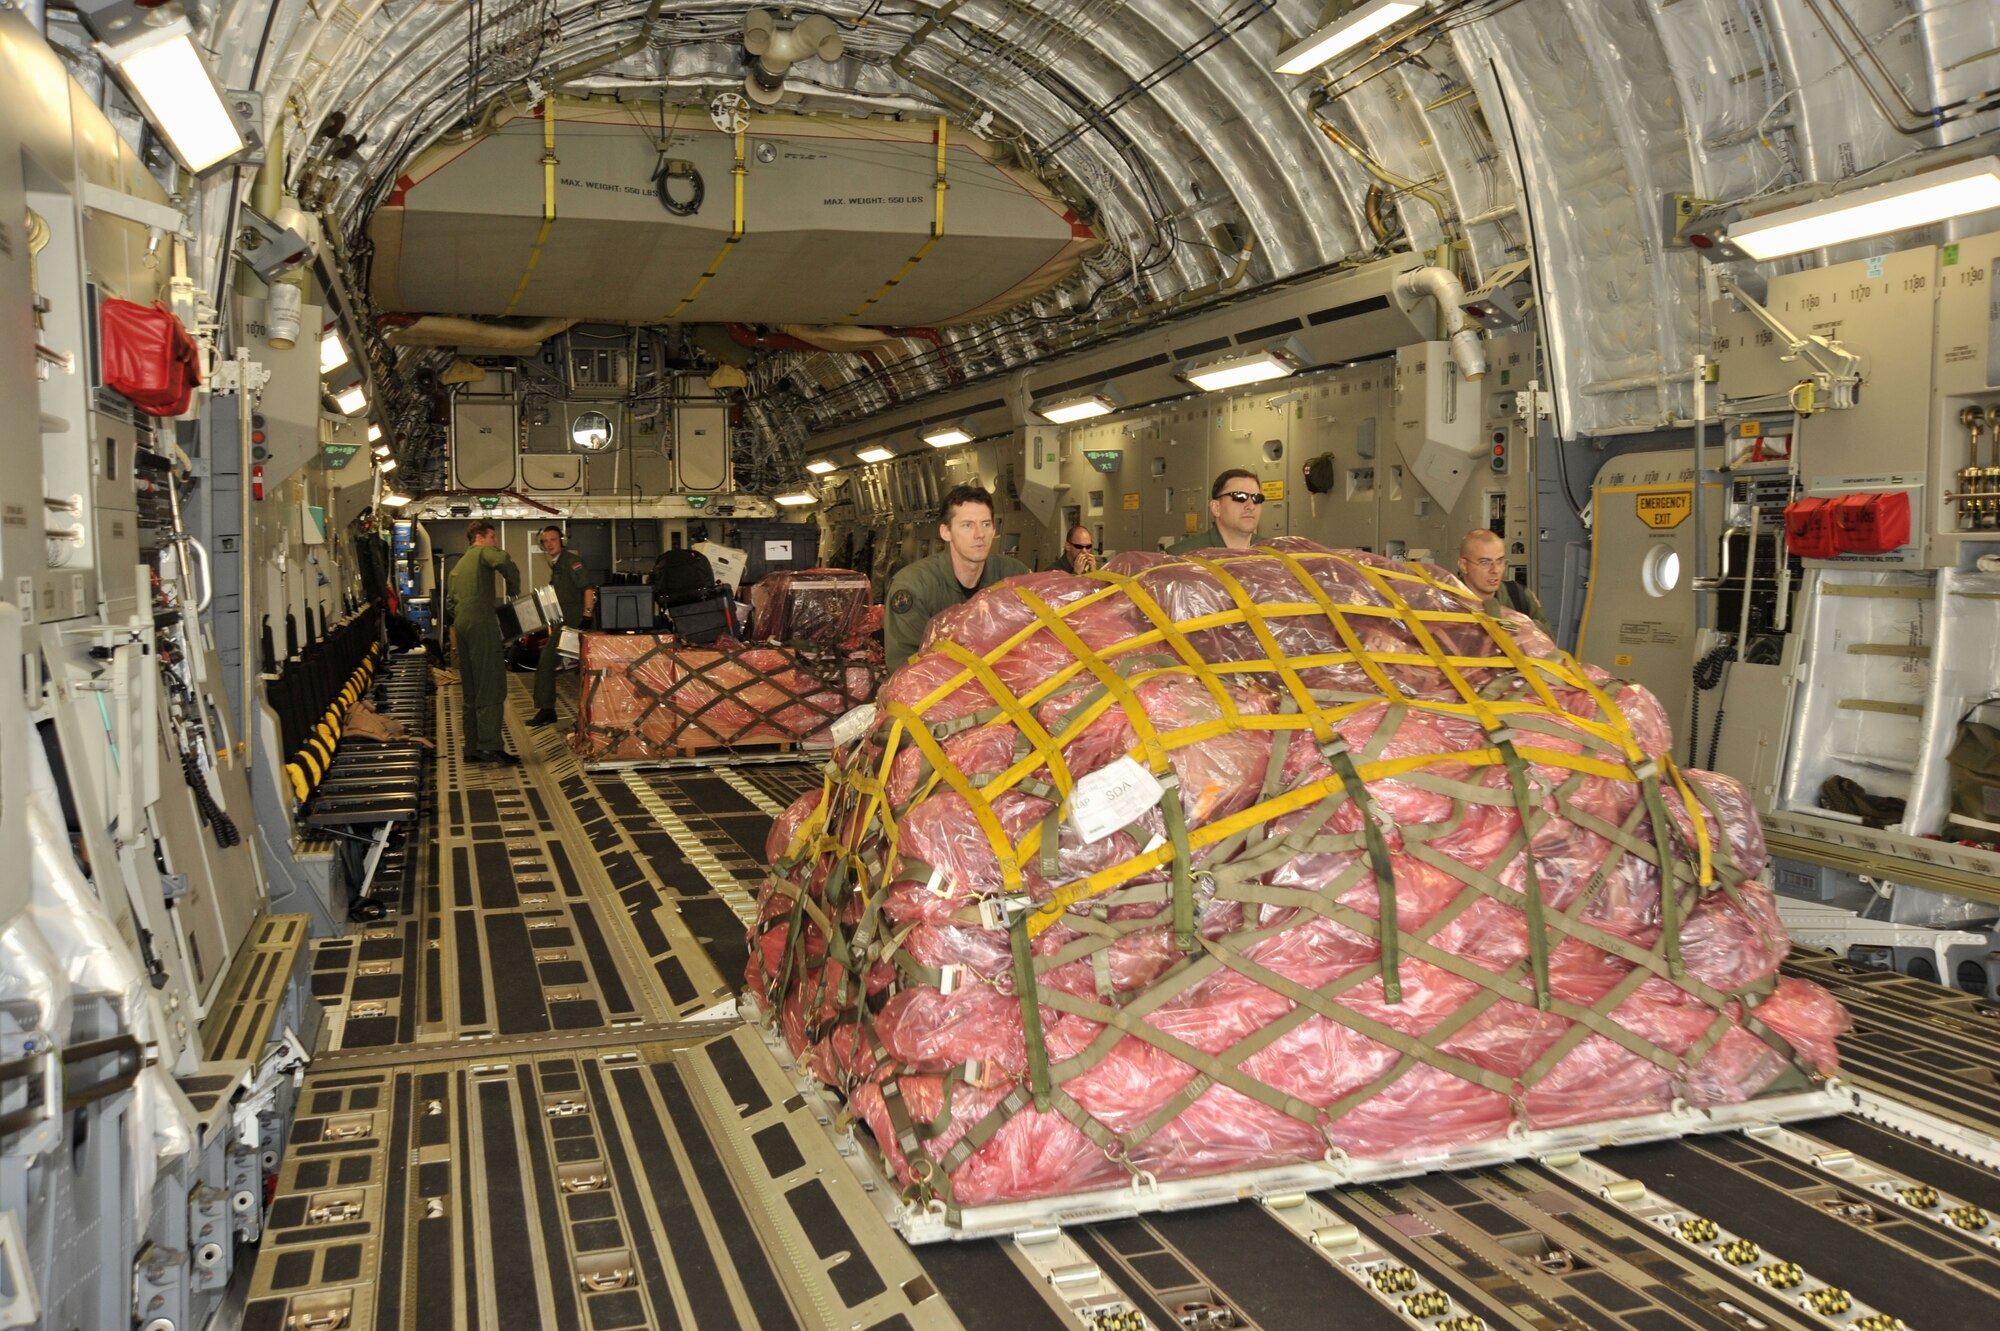 Airmen from the multinational Heavy Airlift Wing based at Papa Air Base, Hungary  unload a C-17 at Baghdad International Airport. The airlift into Iraq was a first by the wing comprised of 12 member nations and facilitated the deployment for members of the NATO Training Mission-Iraq. The wing operates three C-17s and includes NATO member nations Bulgaria, Estonia, Hungary, Lithuania, the Netherlands, Norway, Poland, Romania, Slovenia and the U.S., as well as Partnership for Peace nations Finland and Sweden.